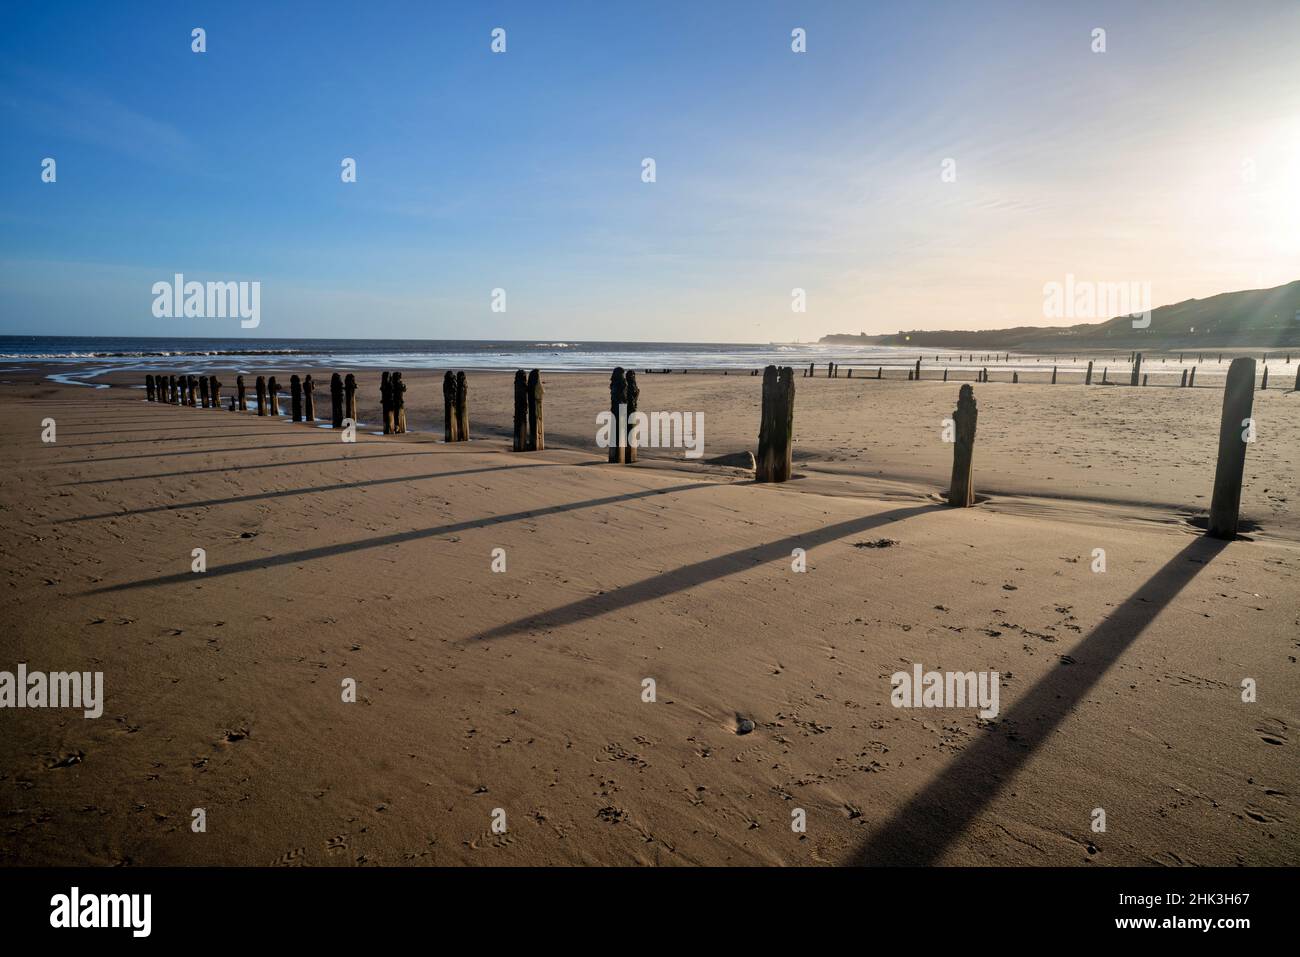 Old worn groynes or breakwaters on Sandsend beach in the early morning, North Yorkshire Stock Photo